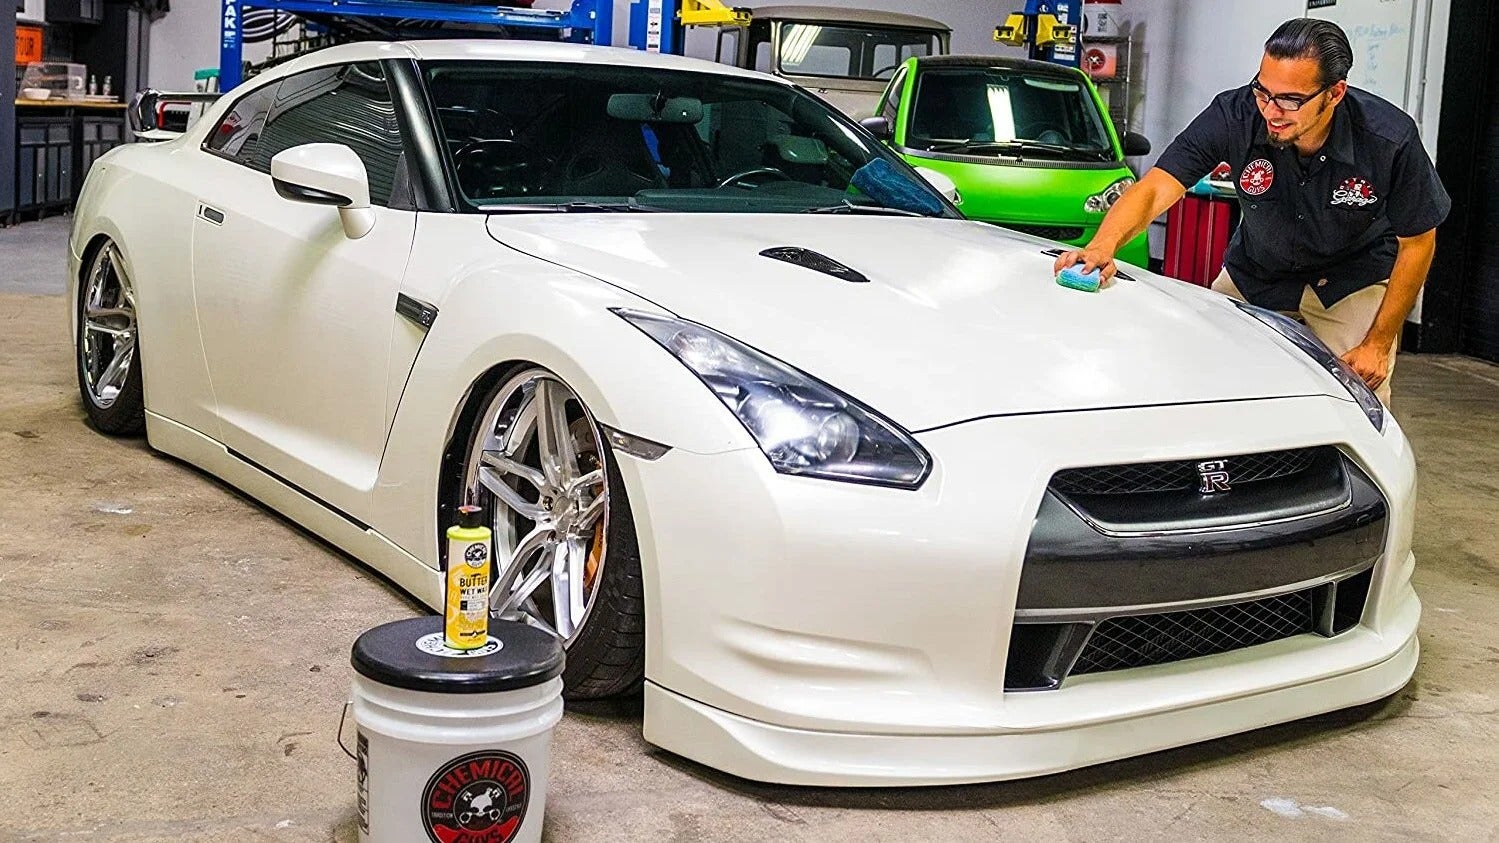 Best Spray Wax (Review & Buying Guide) in 2023